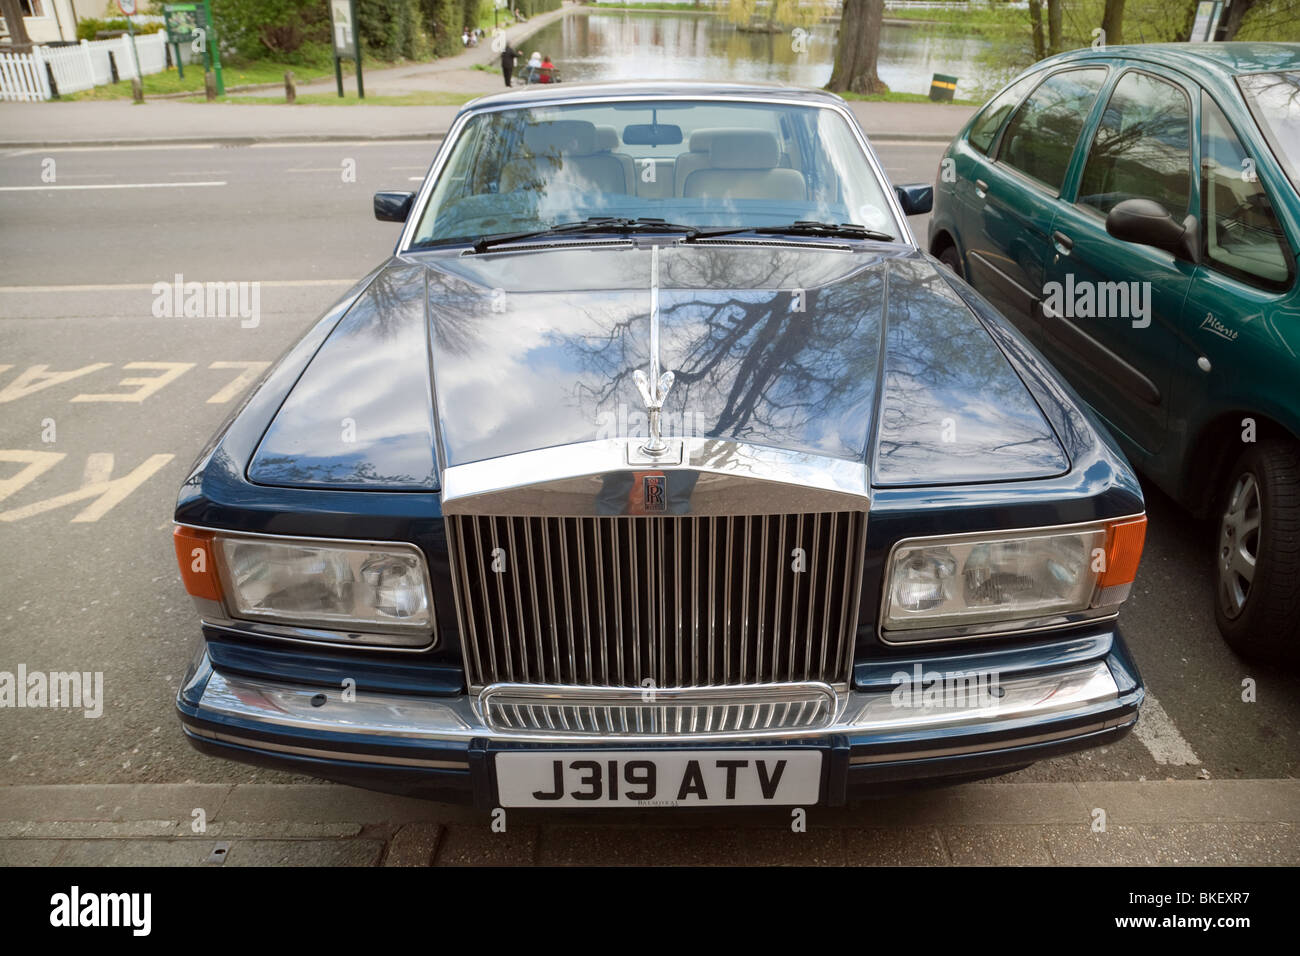 Front of a modern Rolls Royce car Stock Photo